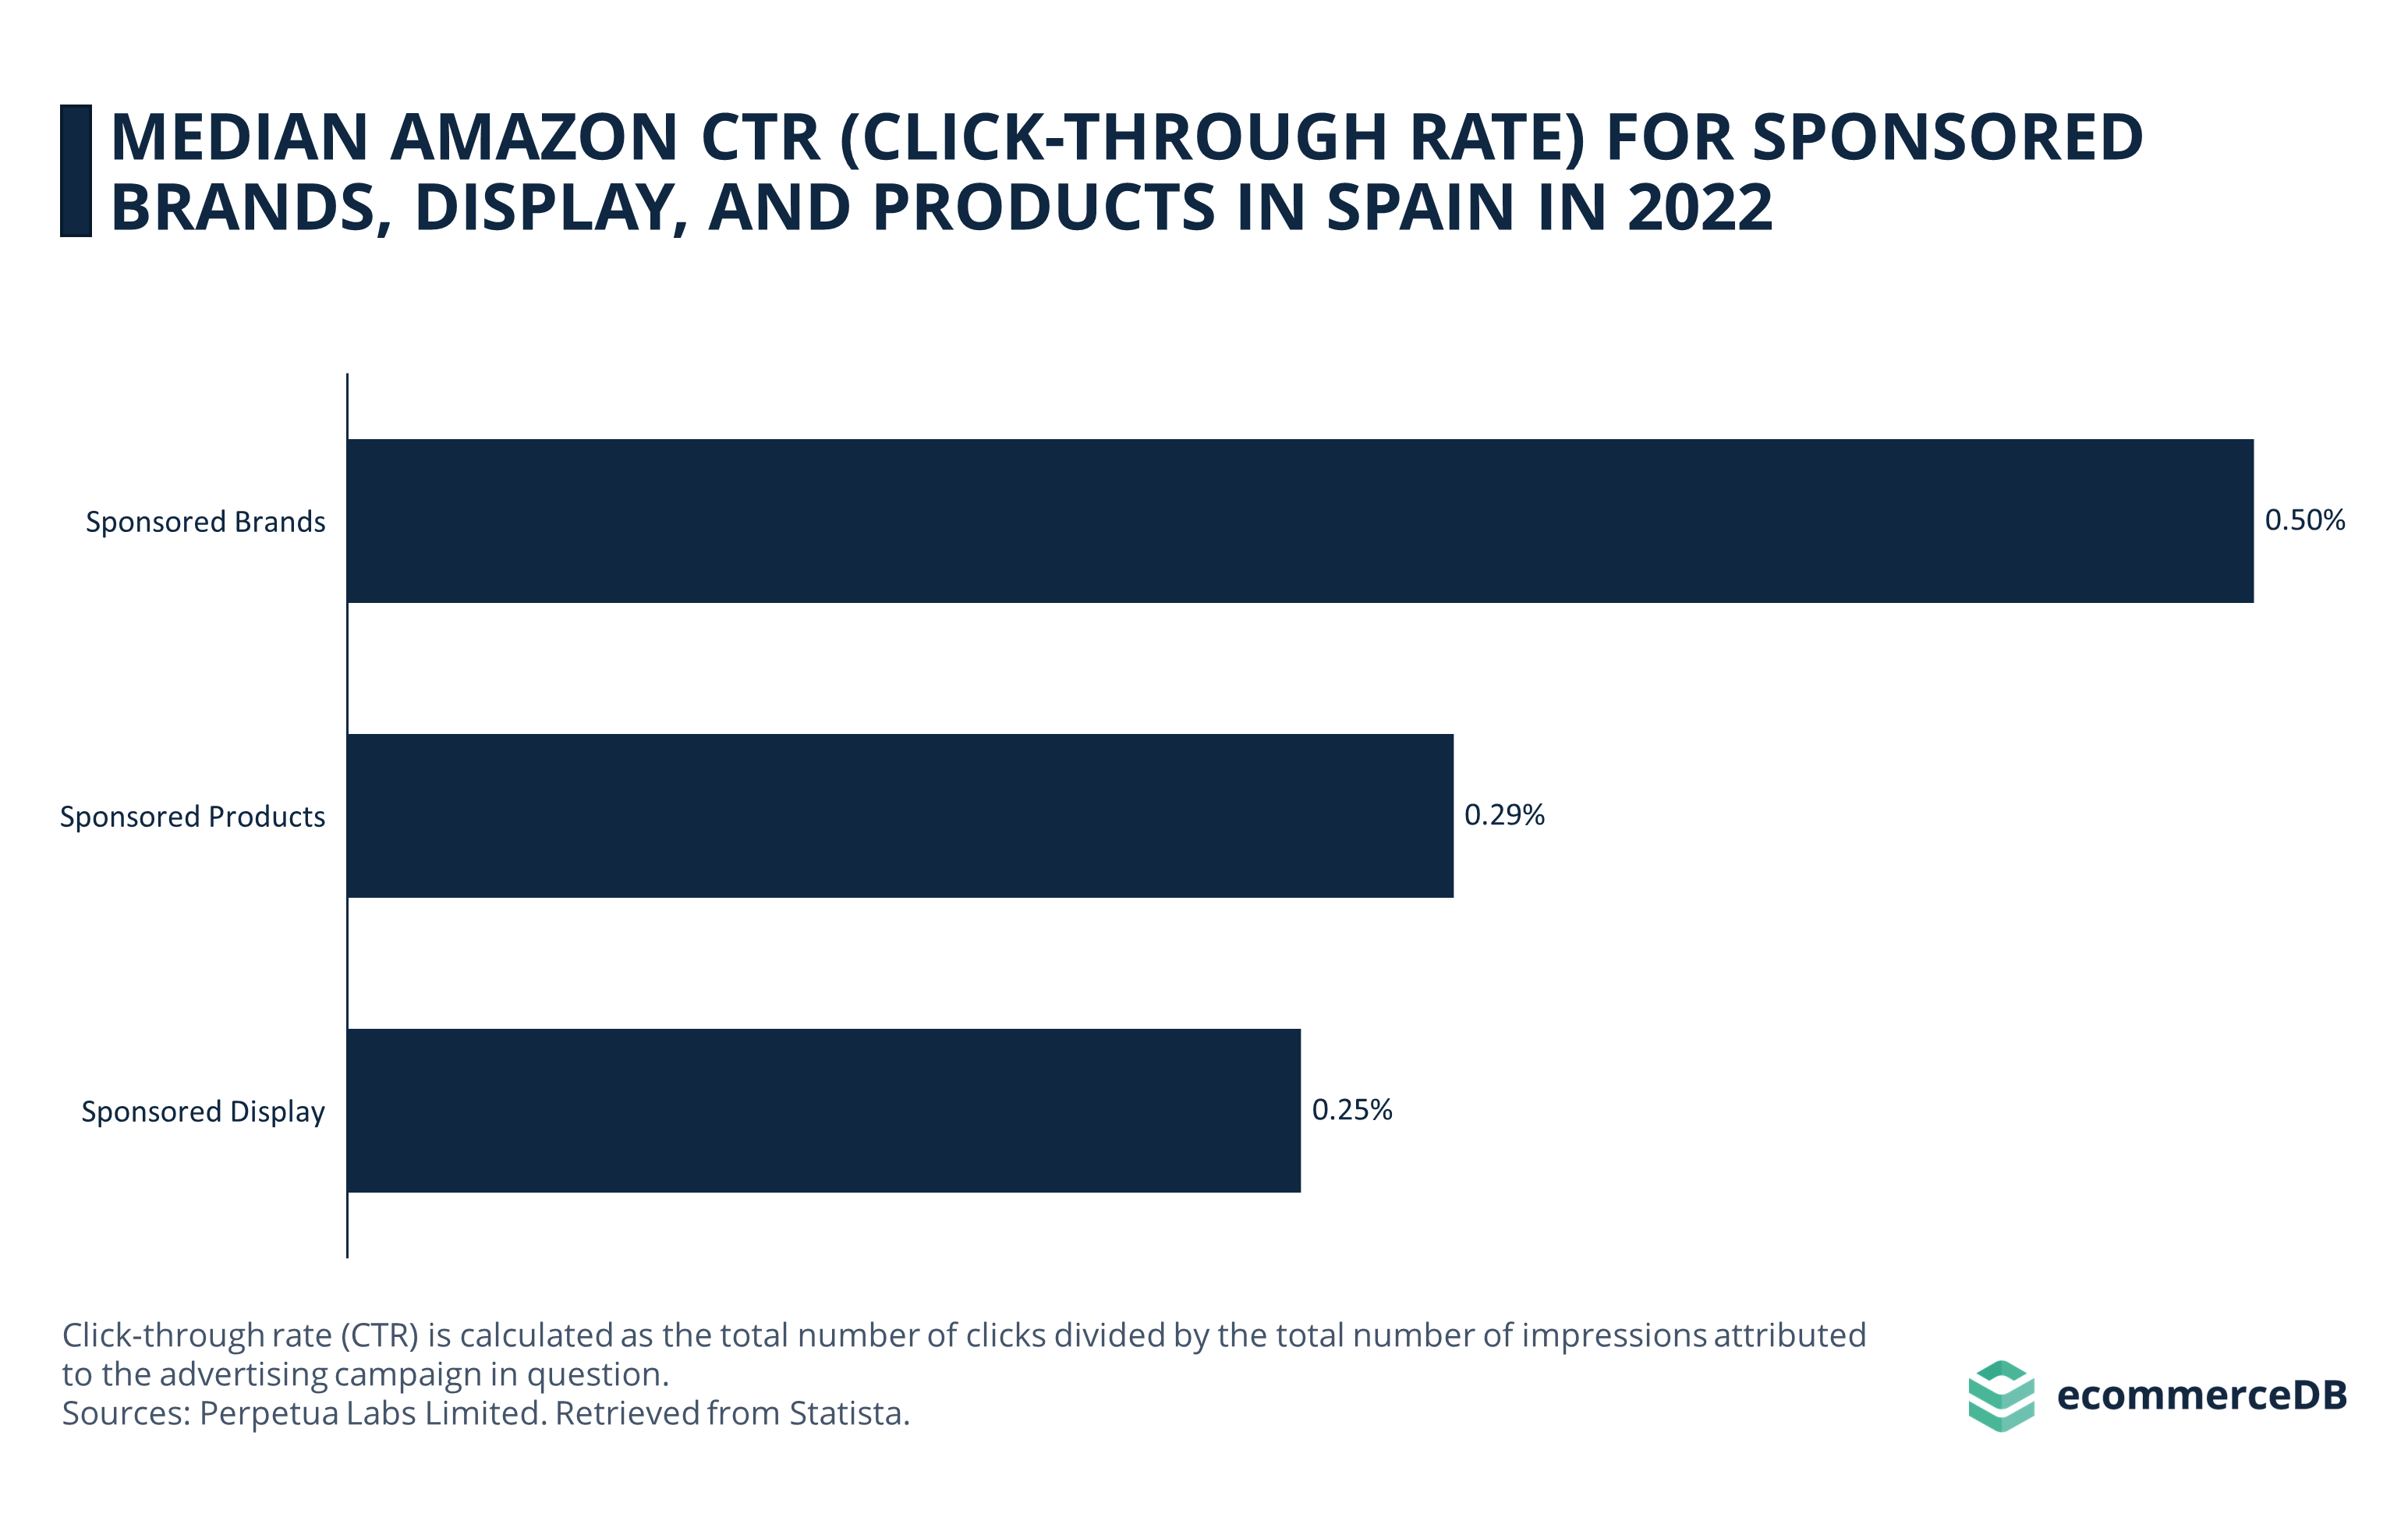 Median Amazon CTR for 3 Ad Types in Spain